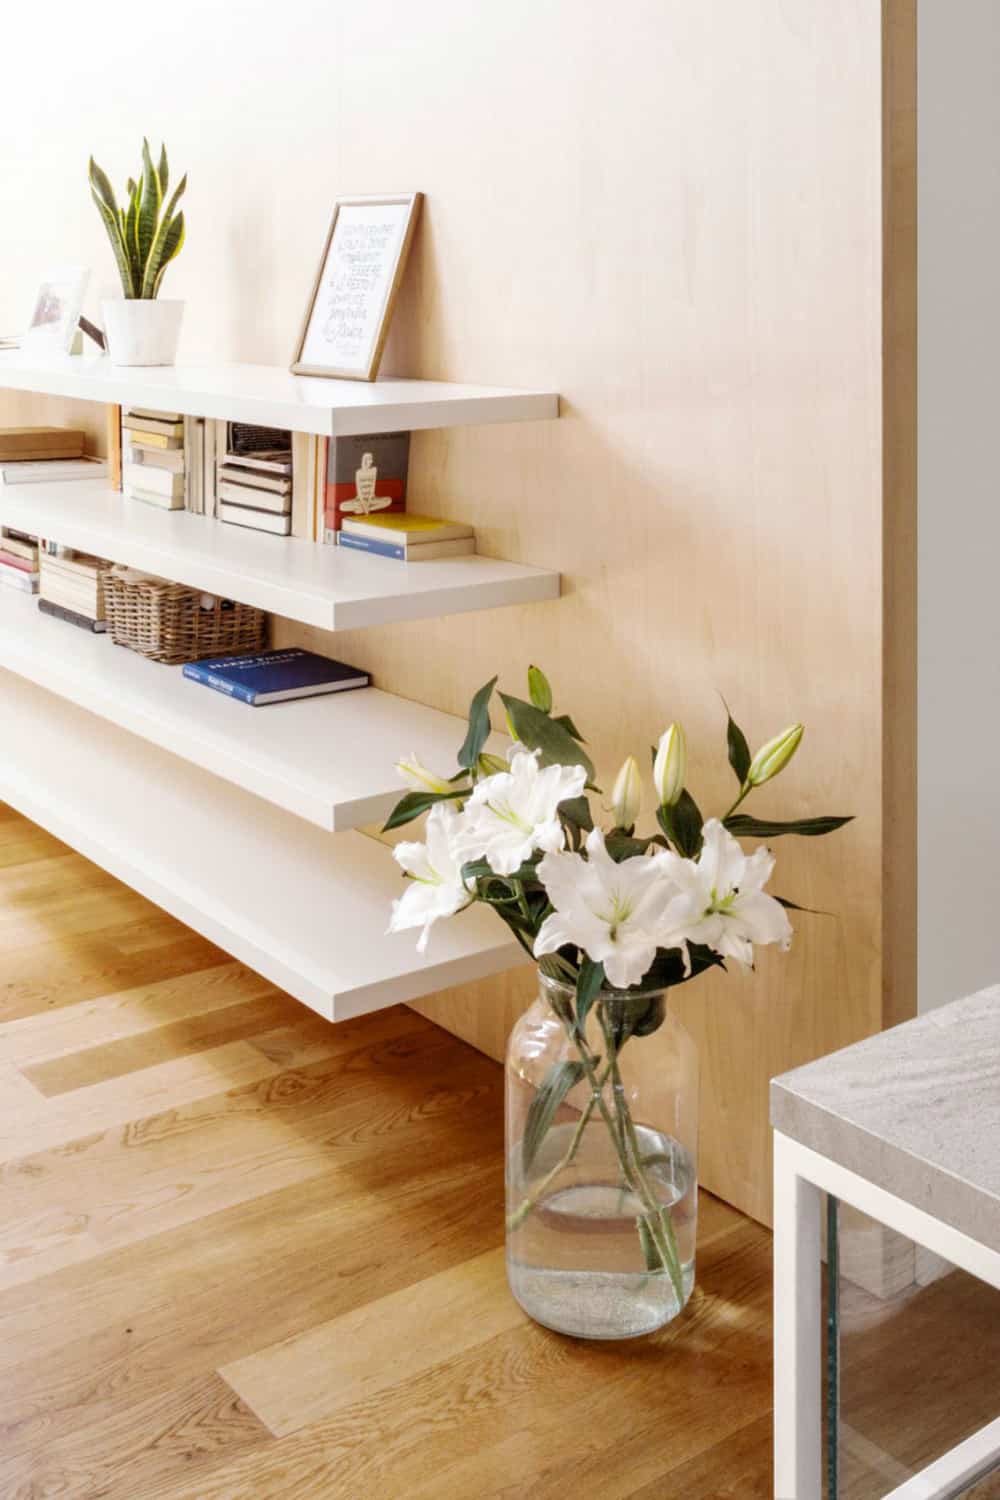 Open shelving provides storage for a home office across the seating room